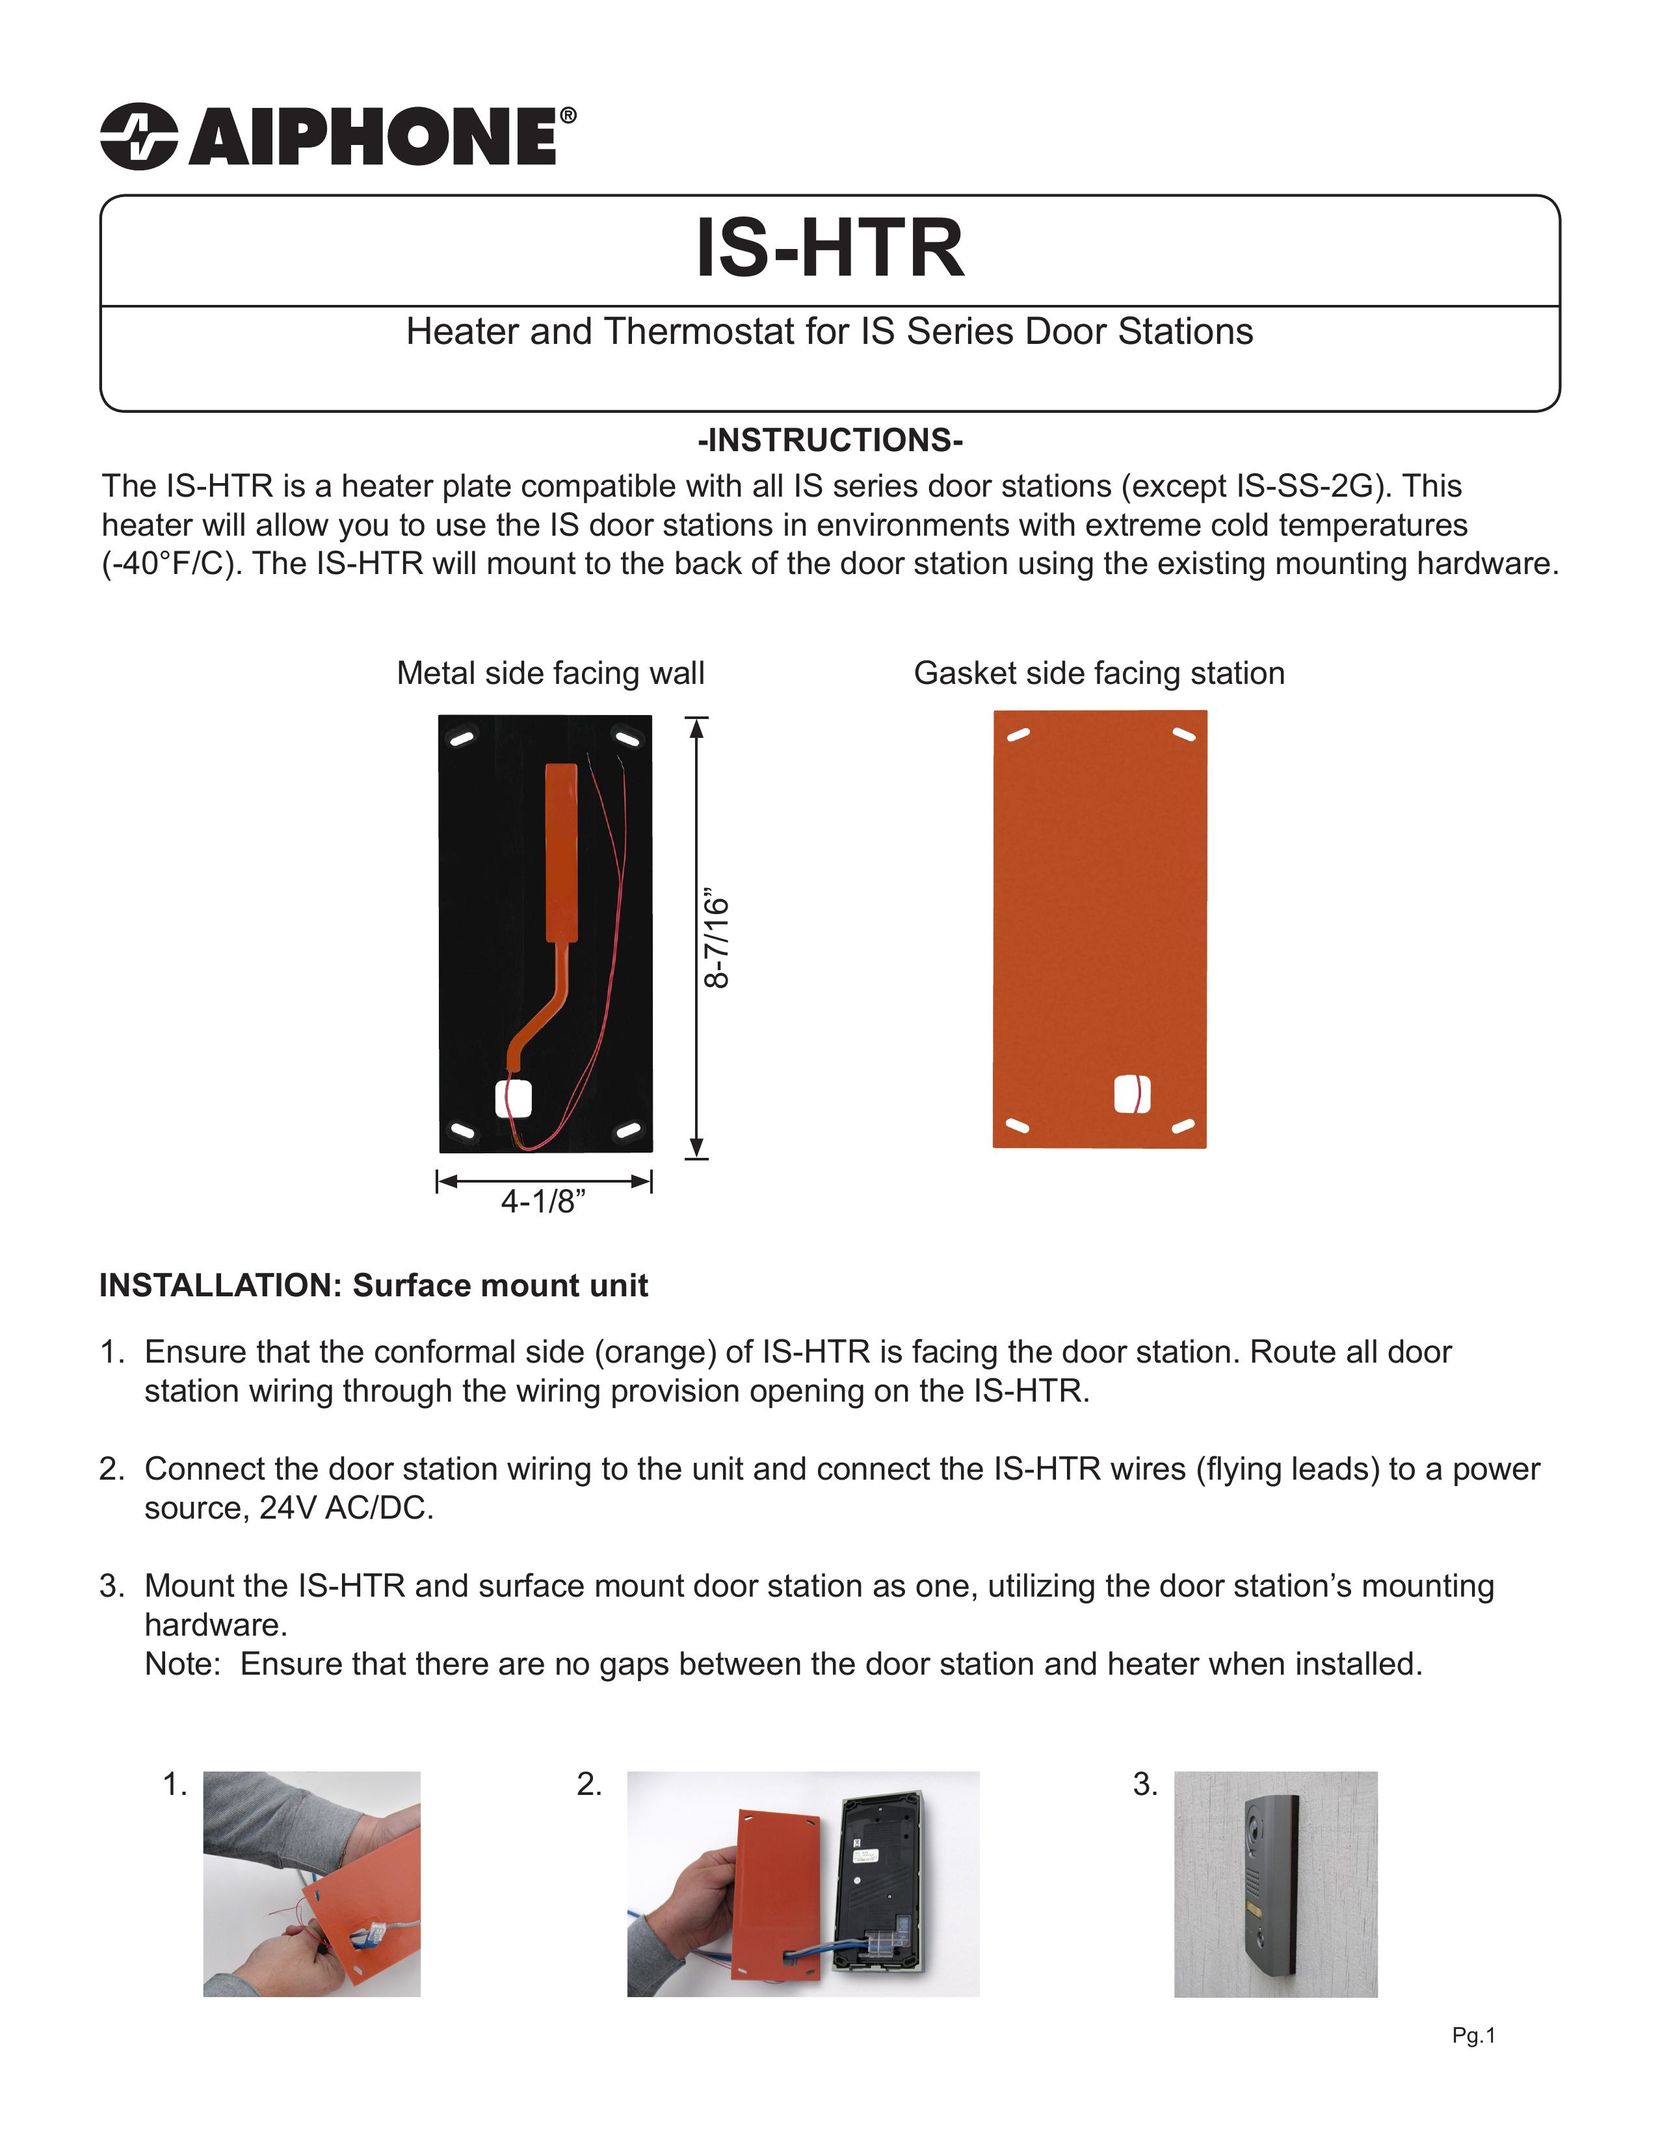 Aiphone IS-HTR Water Heater User Manual